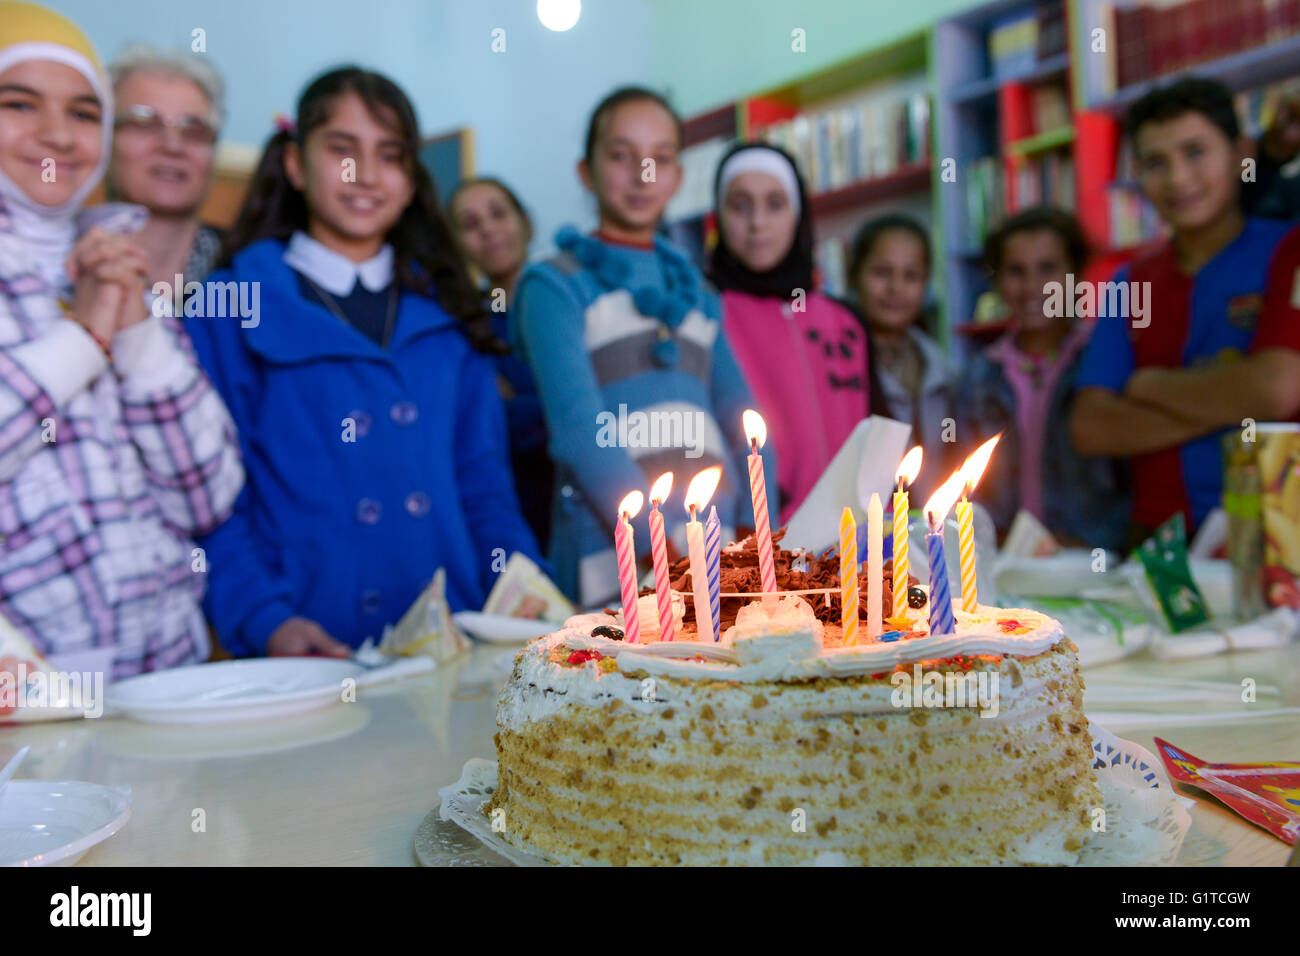 LEBANON Deir el Ahmad, a maronite christian village in Beqaa valley, school for syrian refugee children, children celebrate a birthday together, birthday cake with candle Stock Photo